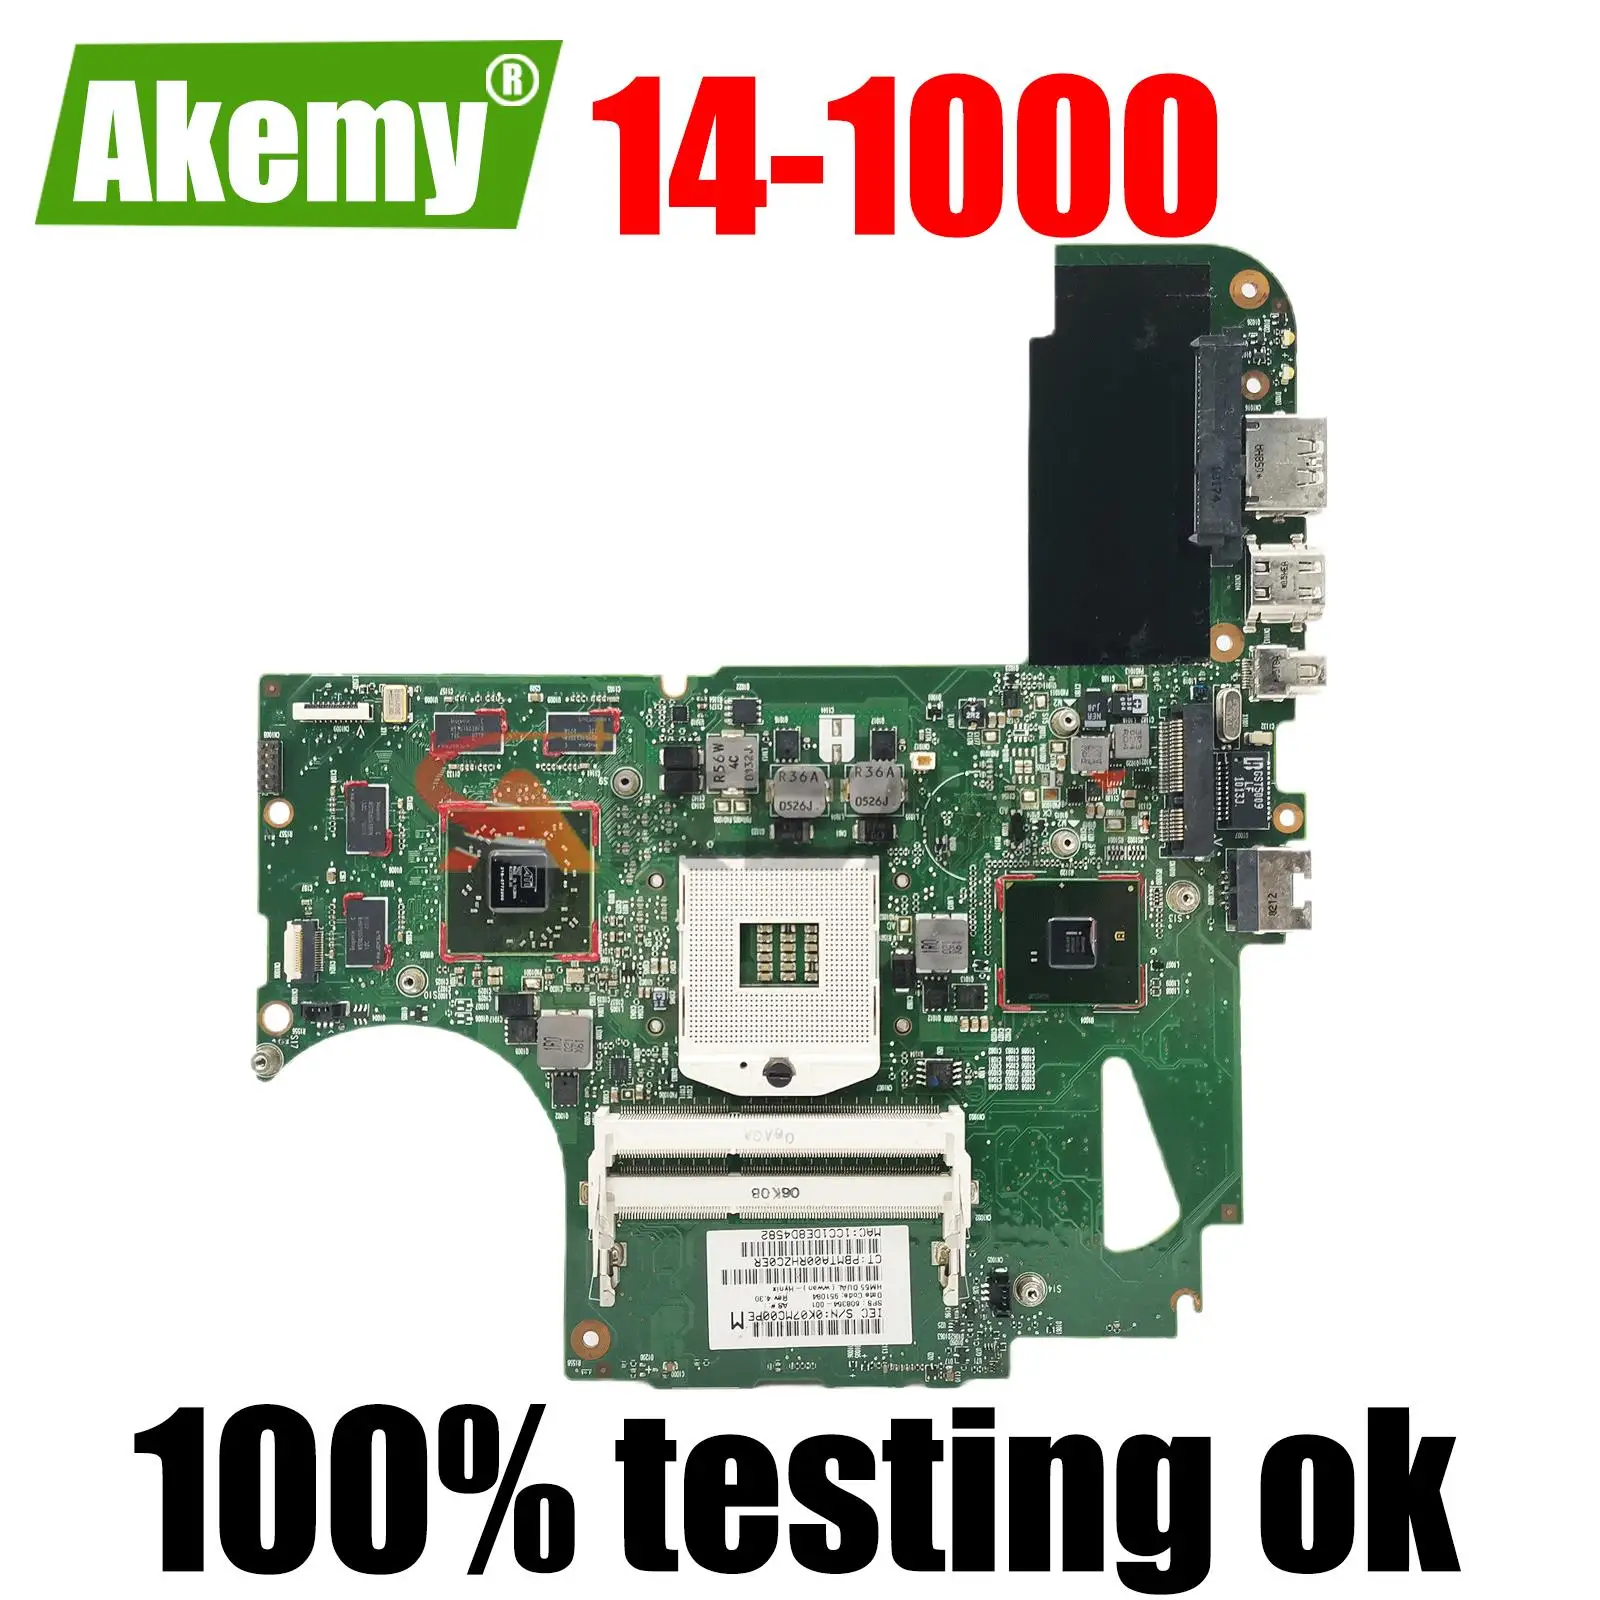 

For HP Envy 14 14-1000 Laptop Motherboard 608364-001 608365-001 6050A2316601-MB-A04 HD 5650M HM55 DDR3 100% testing ok